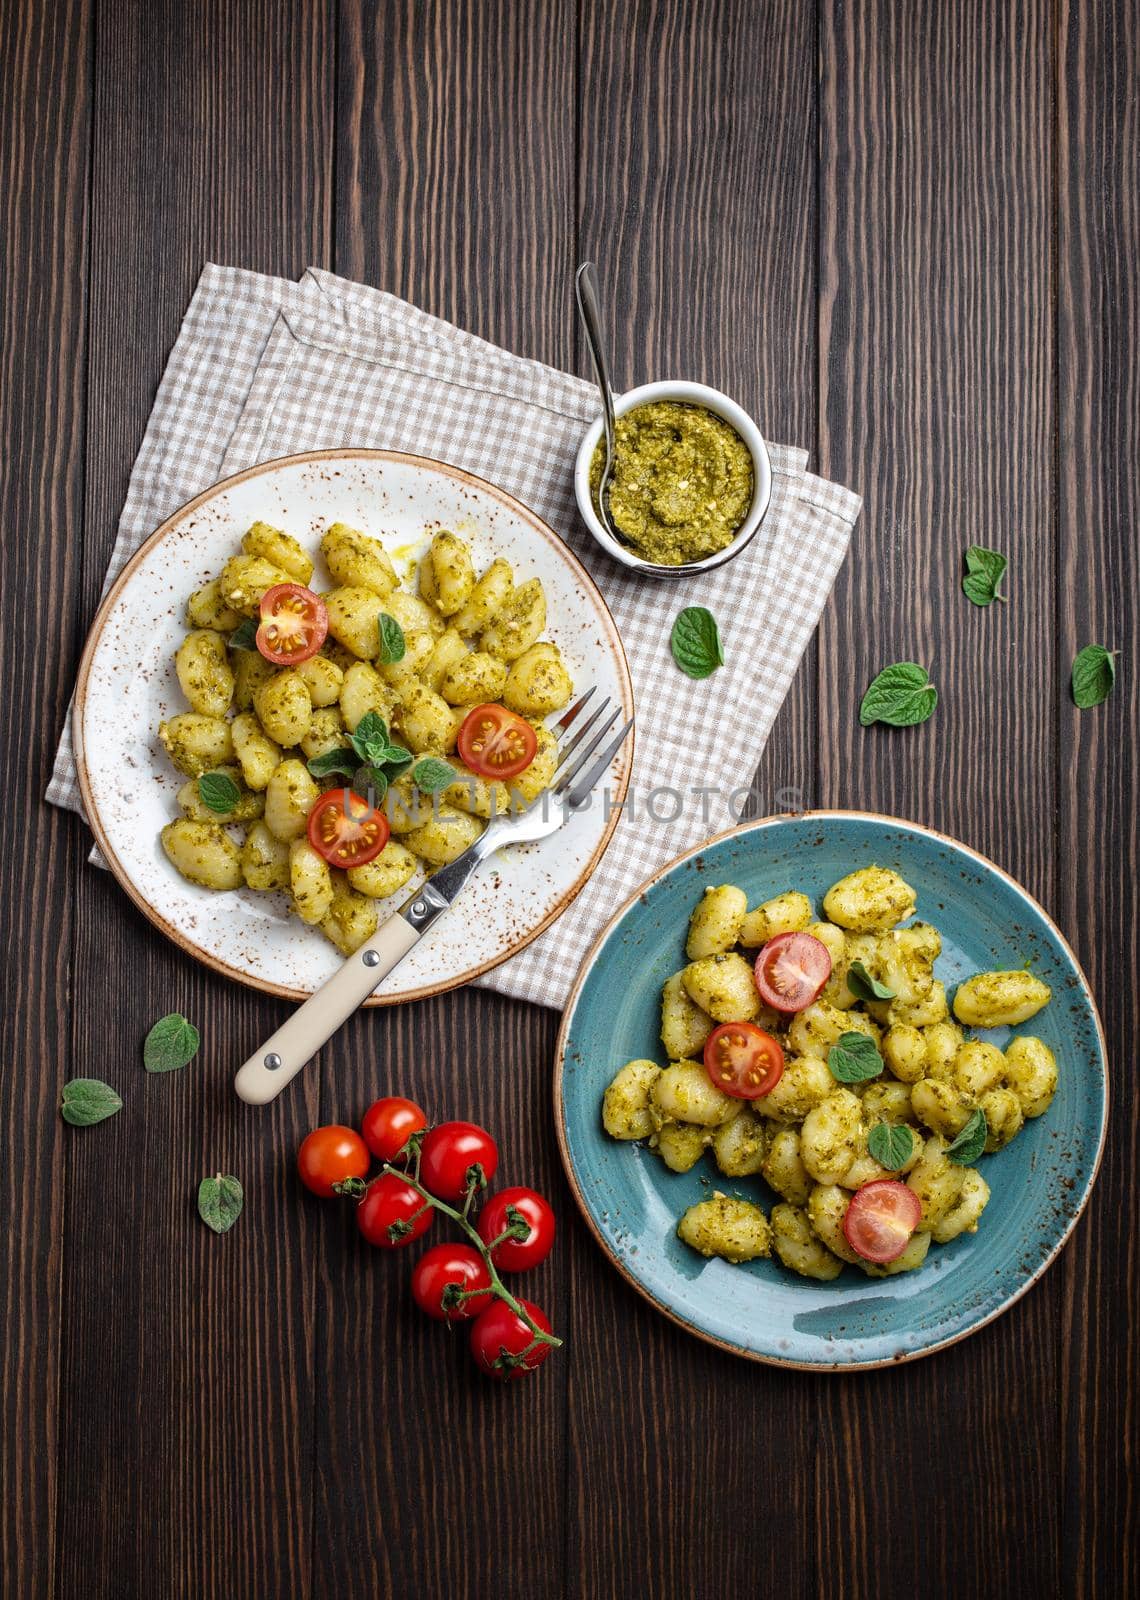 Gnocchi in plates with green pesto sauce, tomatoes and herbs on rustic wooden background, close up, top view. Traditional dish of Italian cuisine